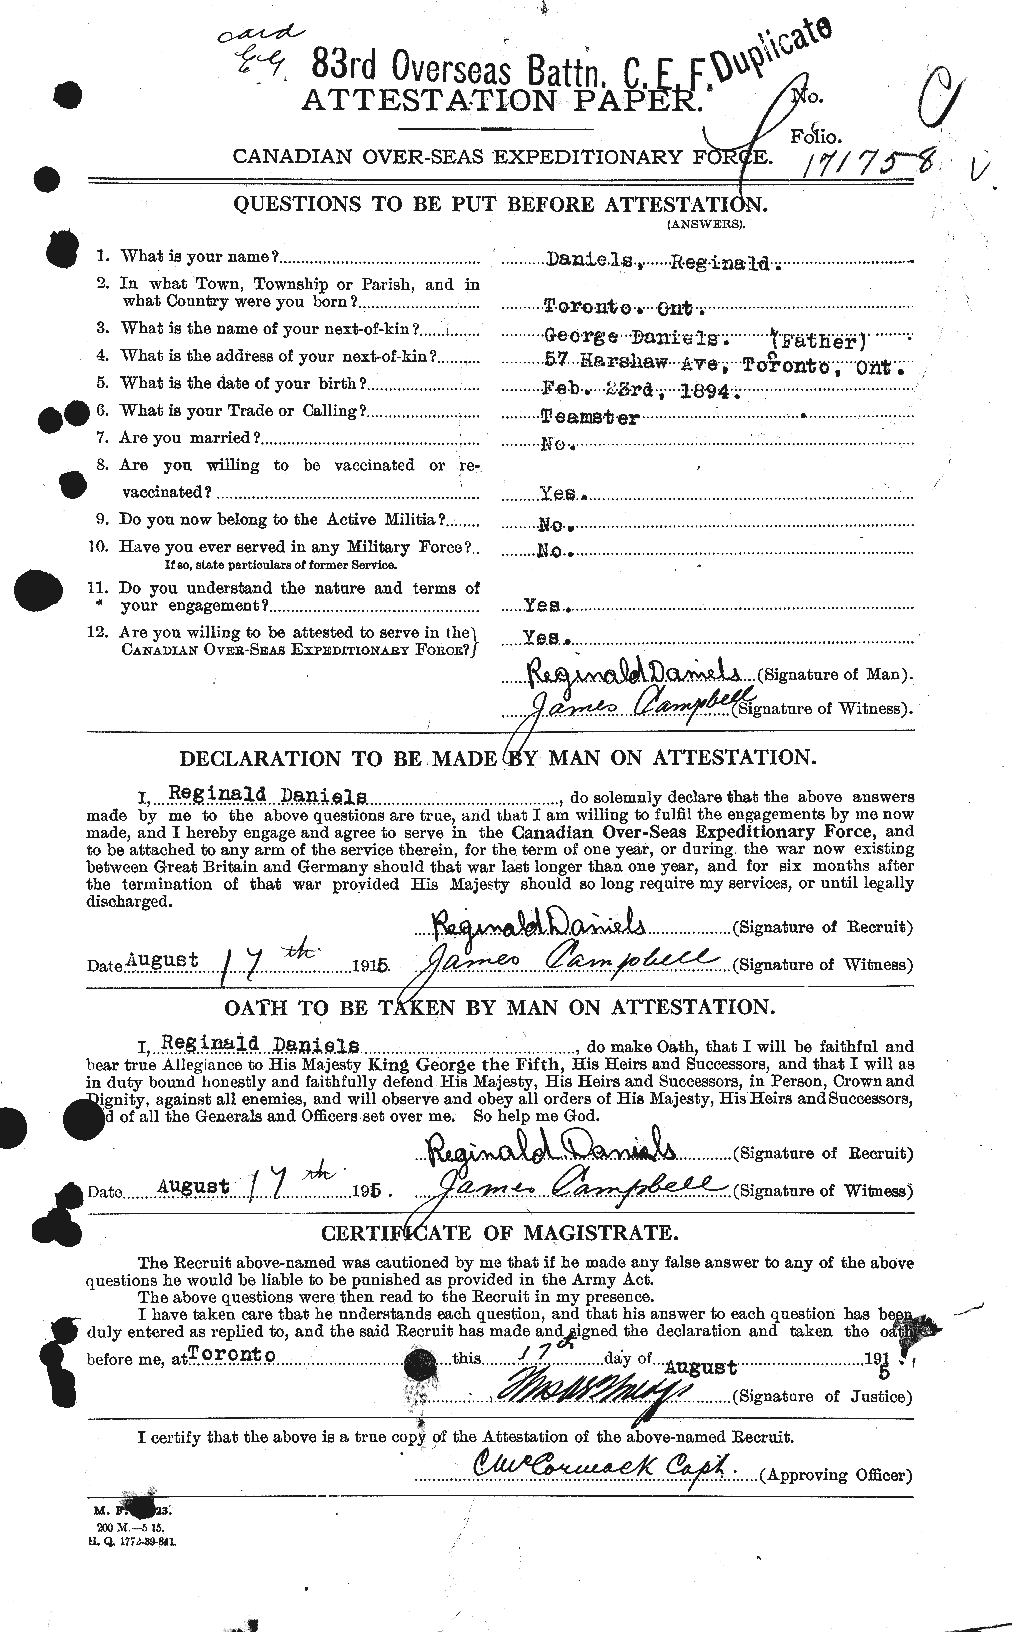 Personnel Records of the First World War - CEF 279666a